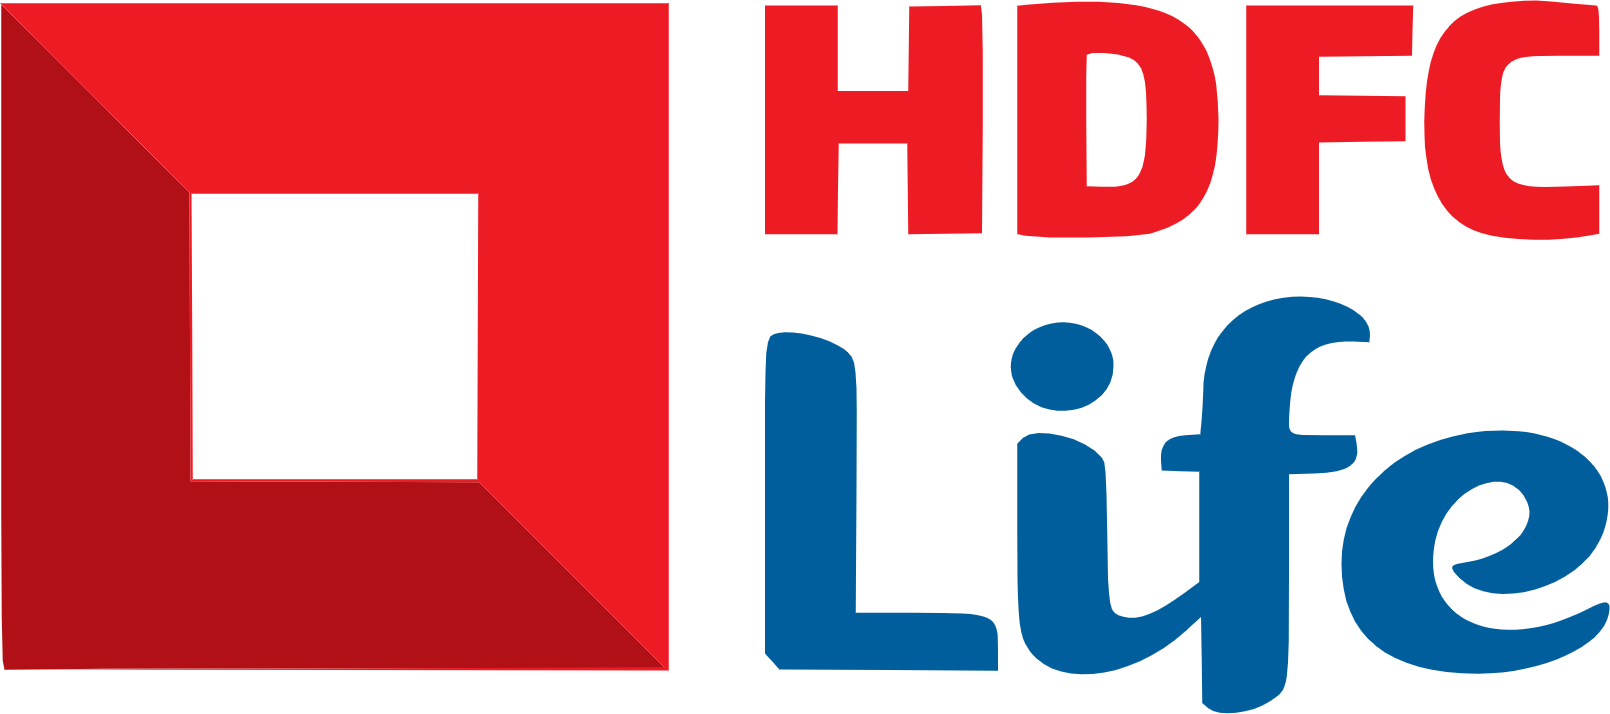 HDFC Life Insurance Company Stocks Live Updates: HDFC Life Insurance Closes at Rs 596.15 with 4760 Shares Traded, 7-Day Avg Volume at 5,105,634 Shares 